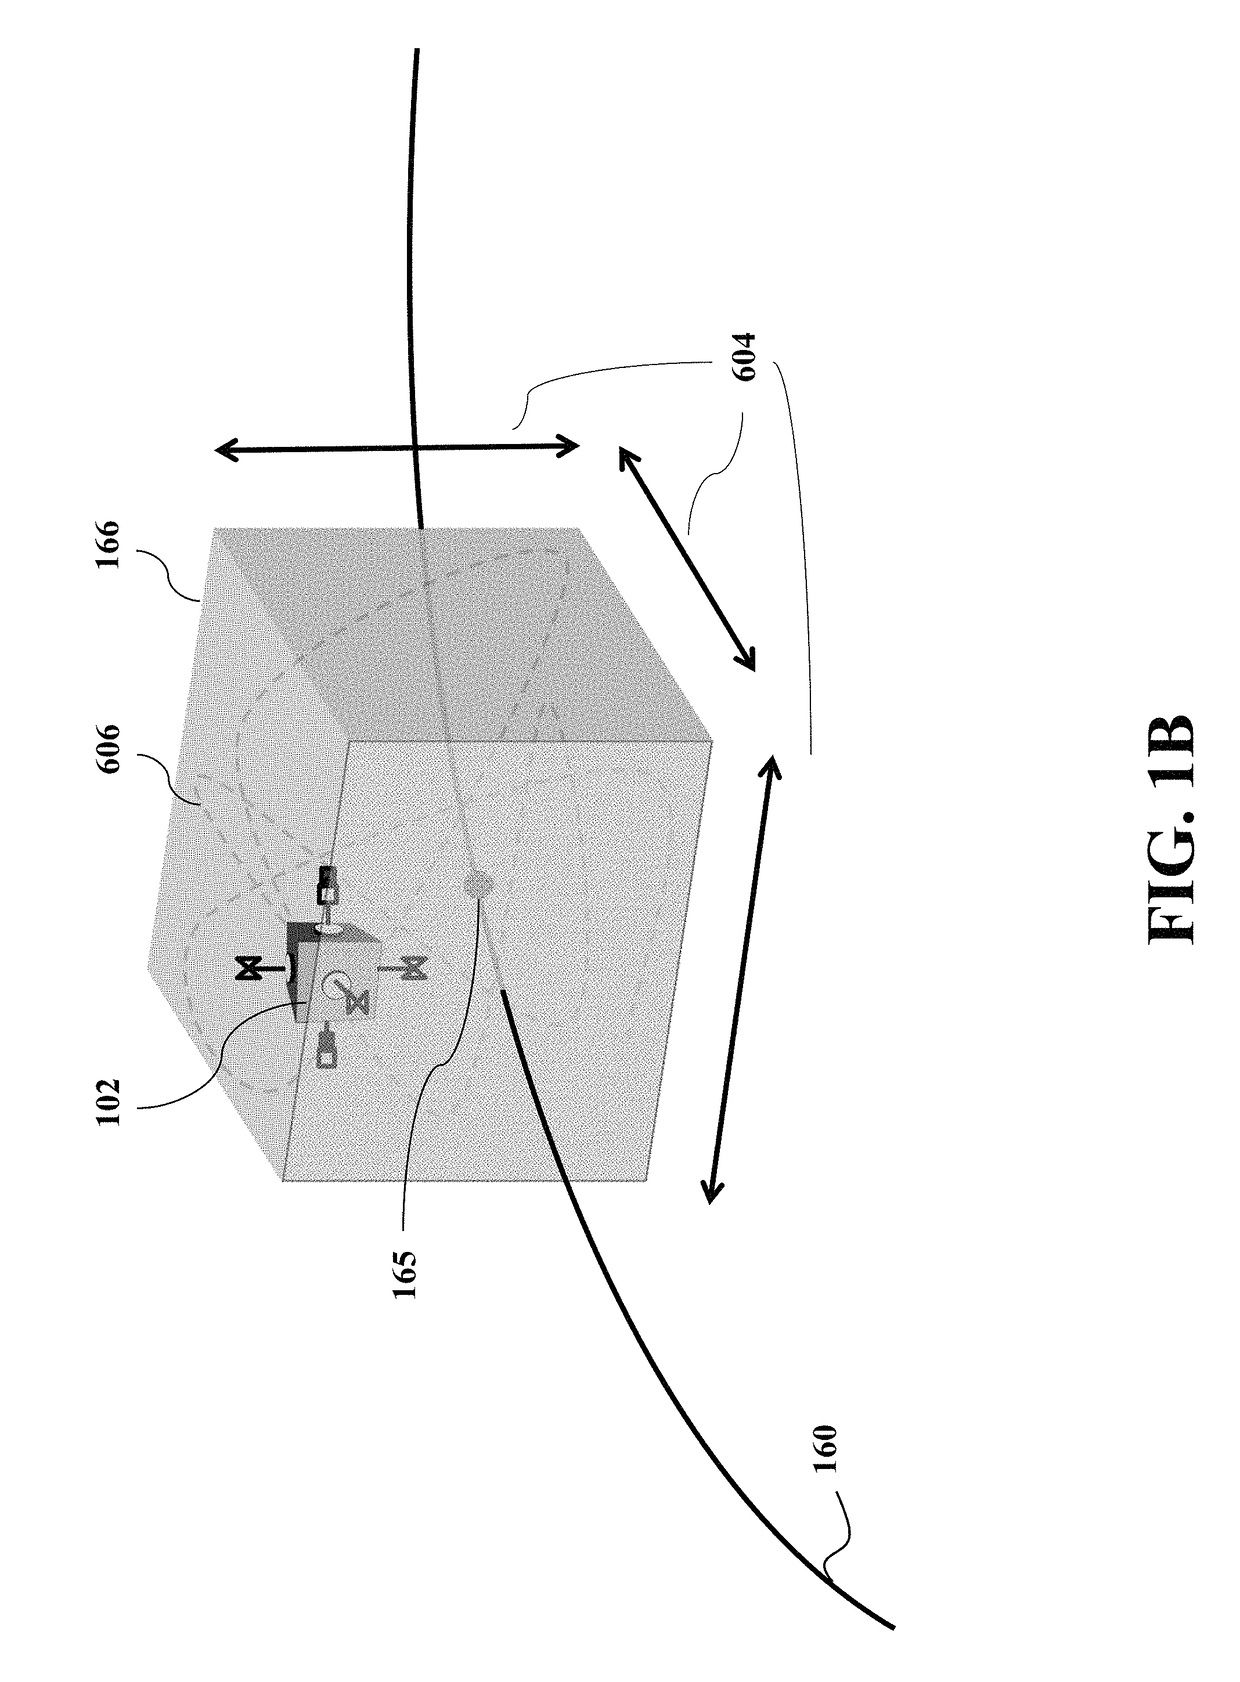 Concurrent station keeping, attitude control, and momentum management of spacecraft